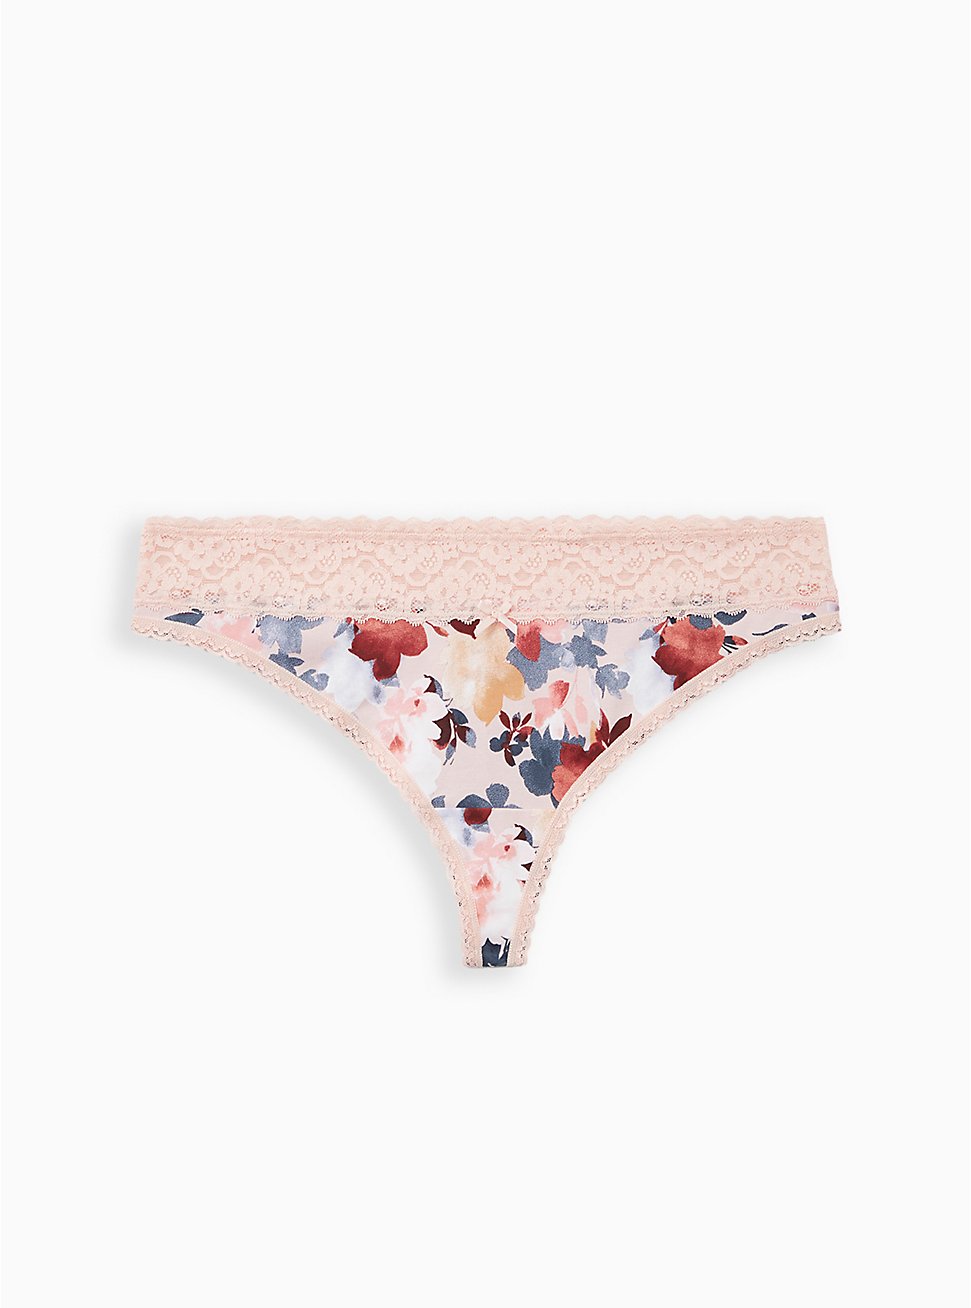 Pink Floral Wide Lace Cotton Thong Panty, Soft Silk Flowers- PINK, hi-res